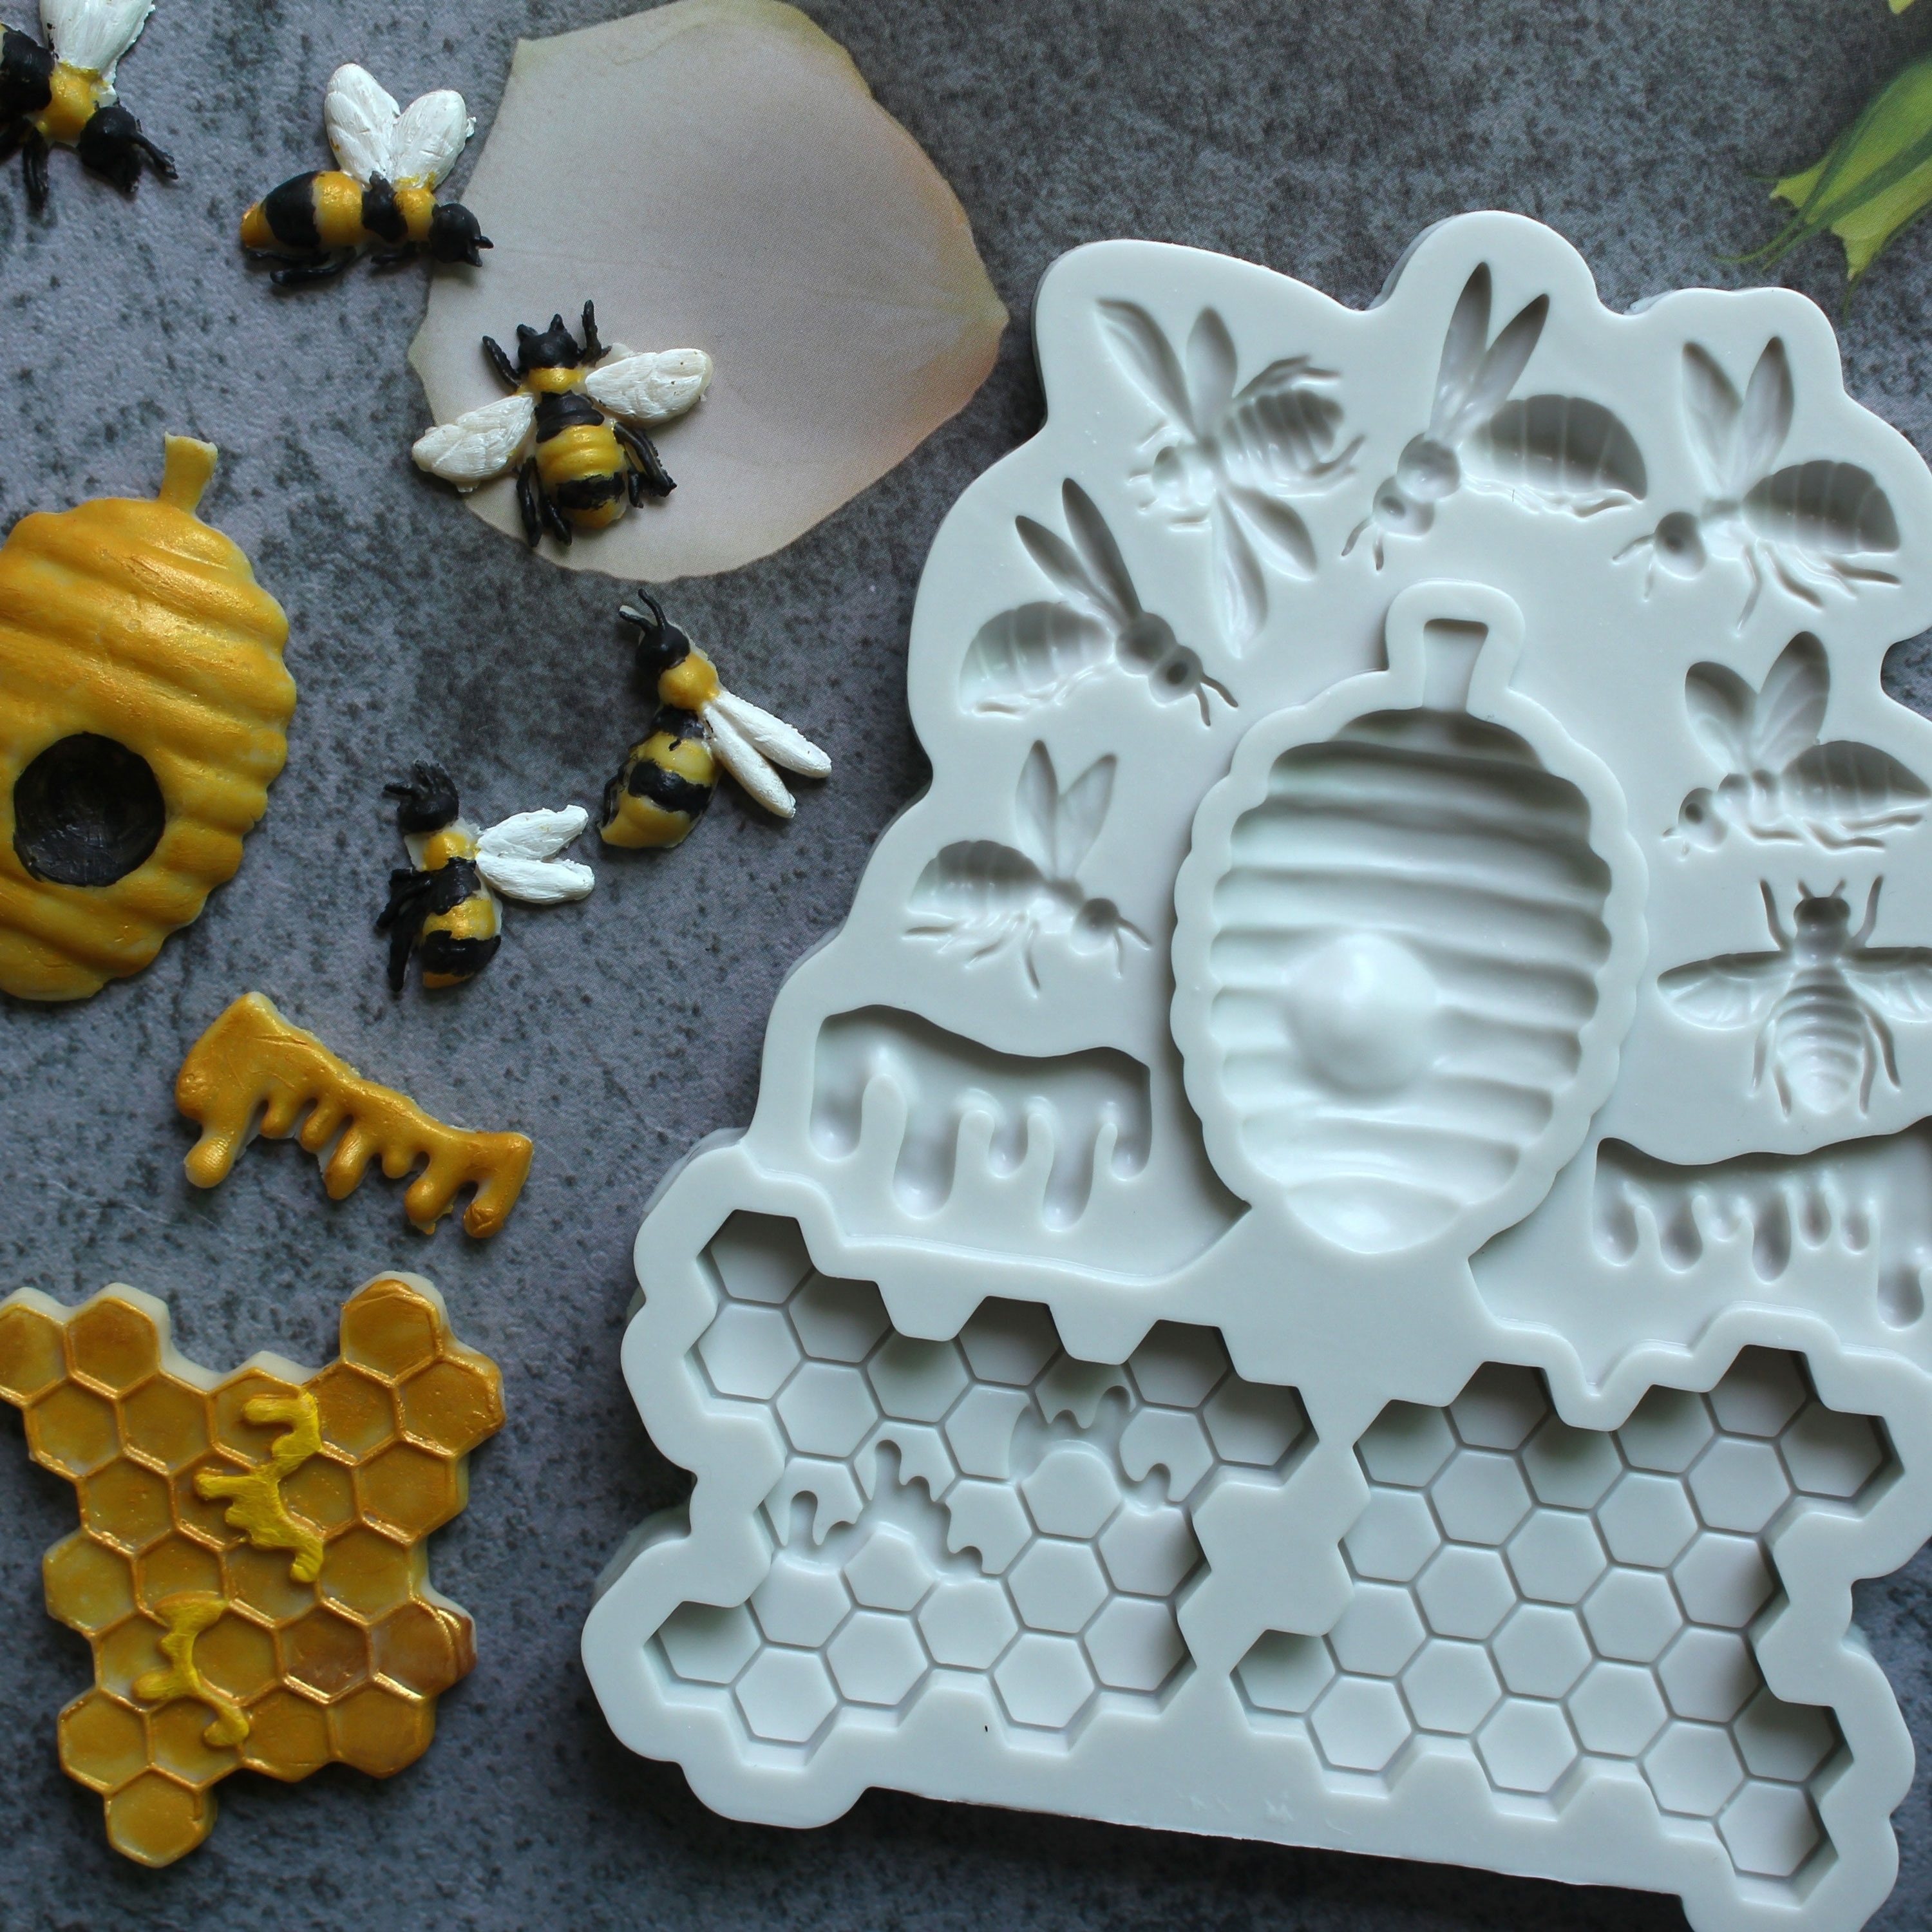  4 Pcs Baking Molds Tuile Molds, Leaf and Honeycomb Cake  Silicone Molds, Hollow 3D Chocolate Candy Lace Fondant Silicone Molds for  Baking, Sugar Craft, Cocktail, Cake, Cupcake, Dessert Decoration : Home